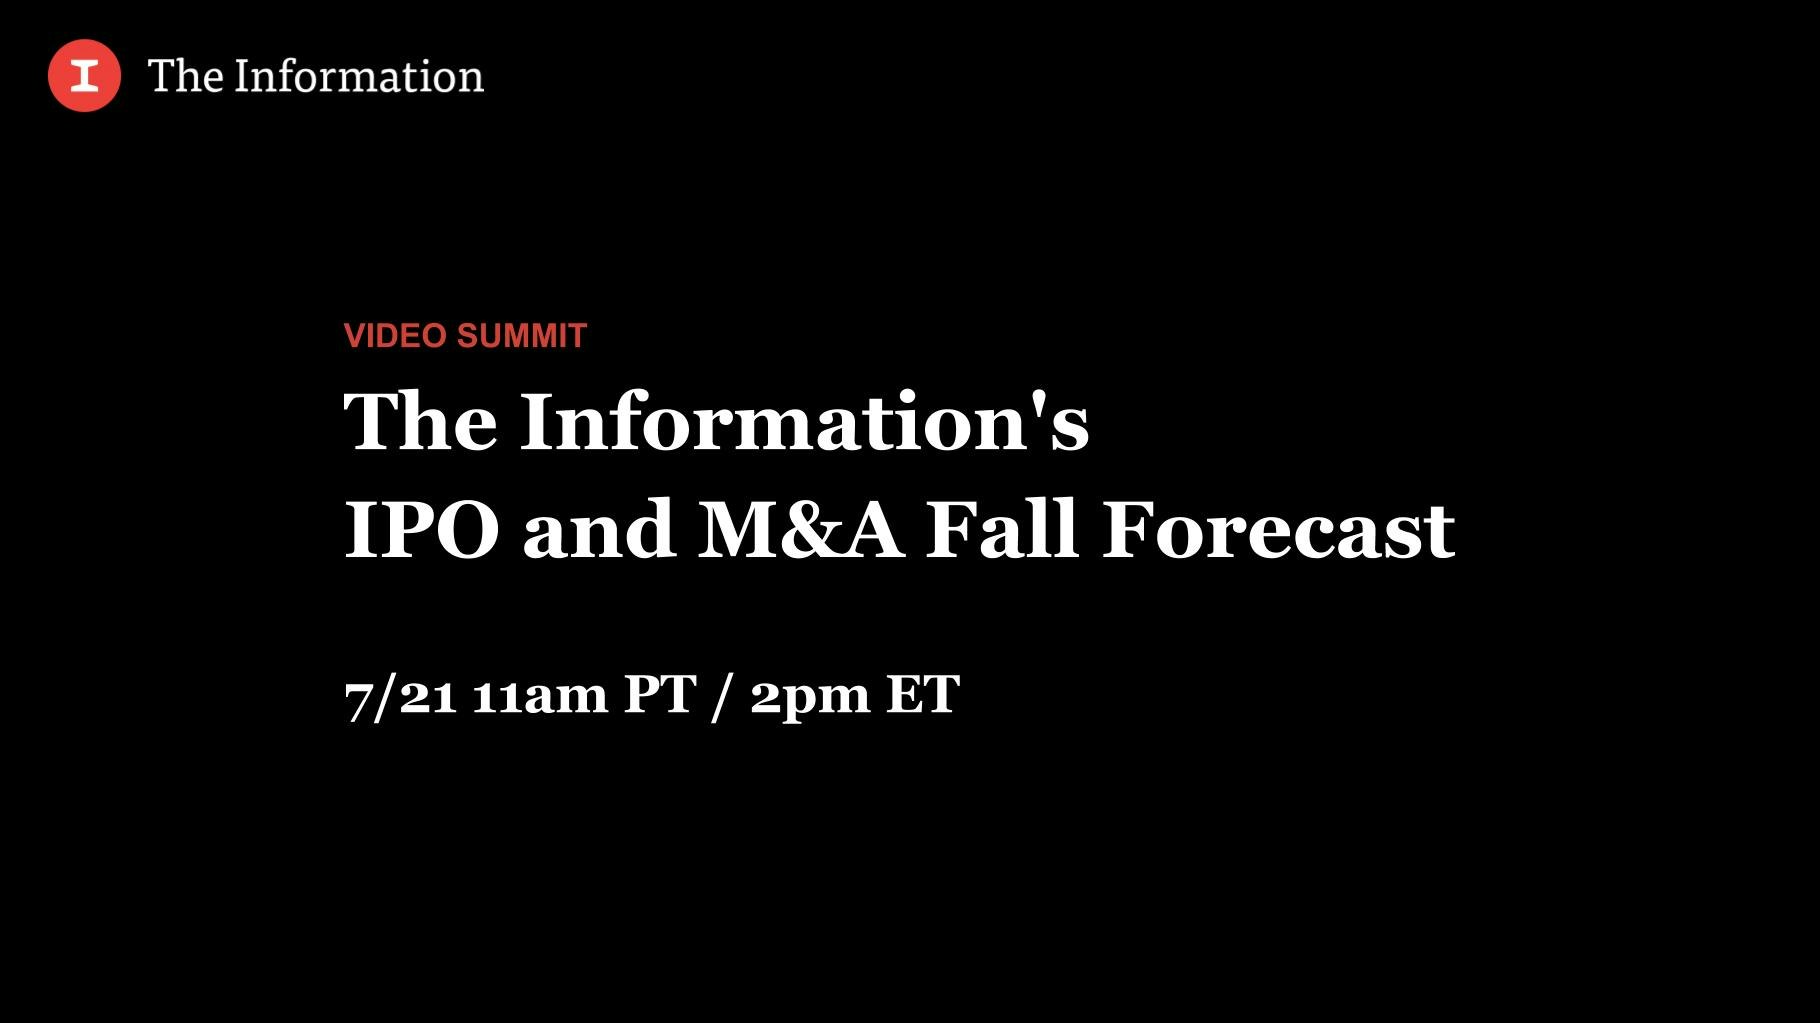 The Information's IPO and M&A Fall Forecast